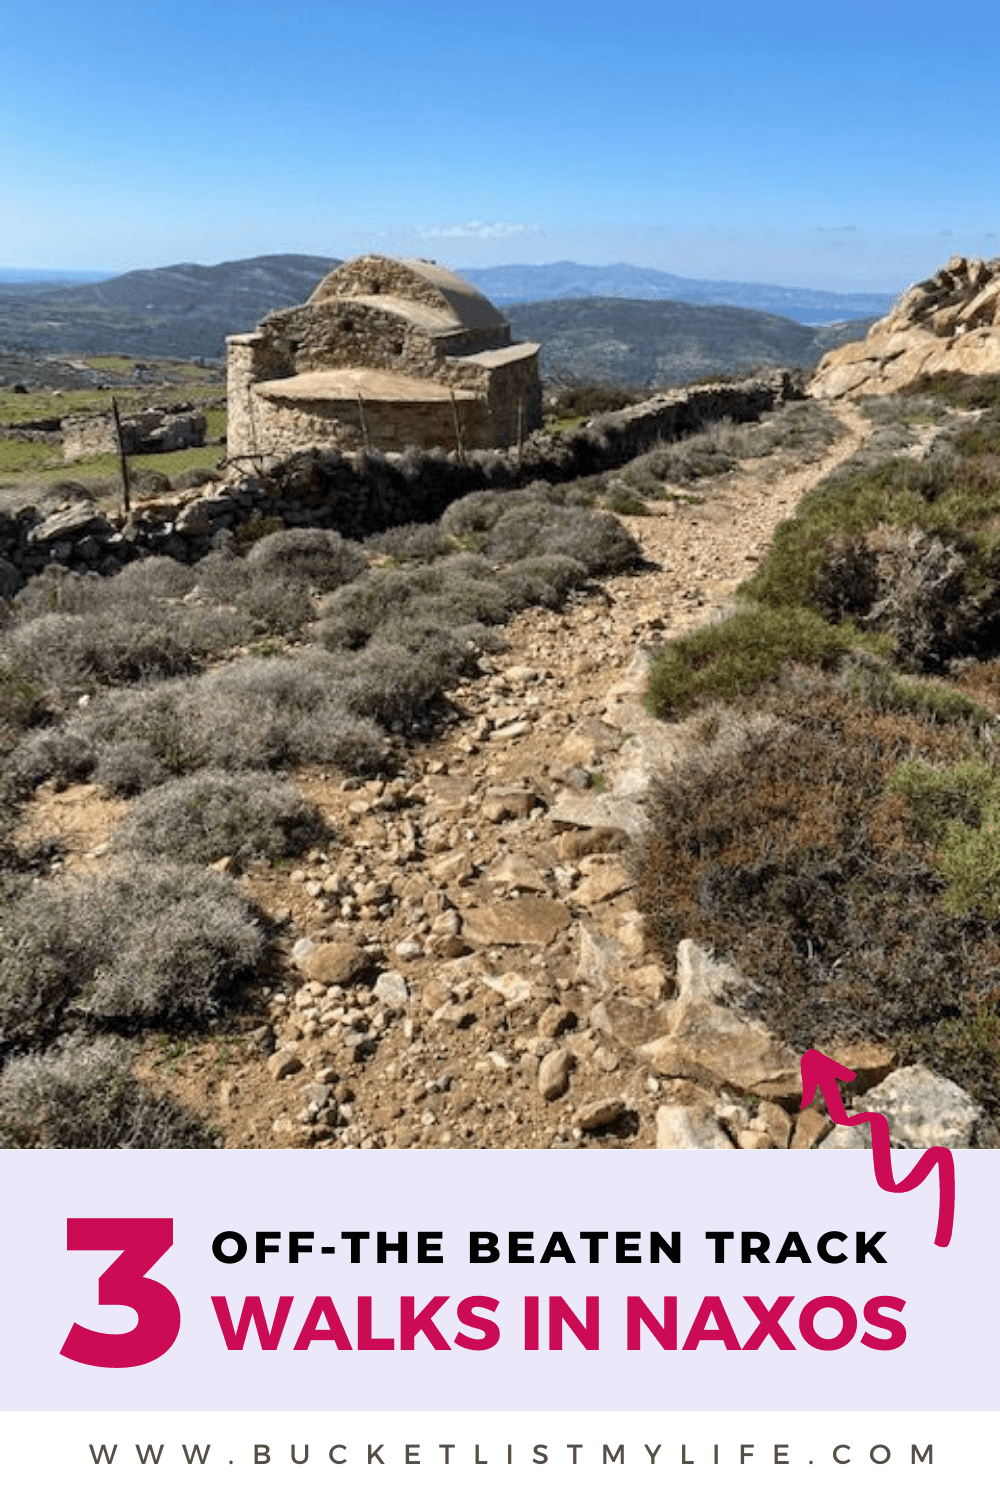 3 Short Hikes in Naxos to Hidden & Unusual Sites